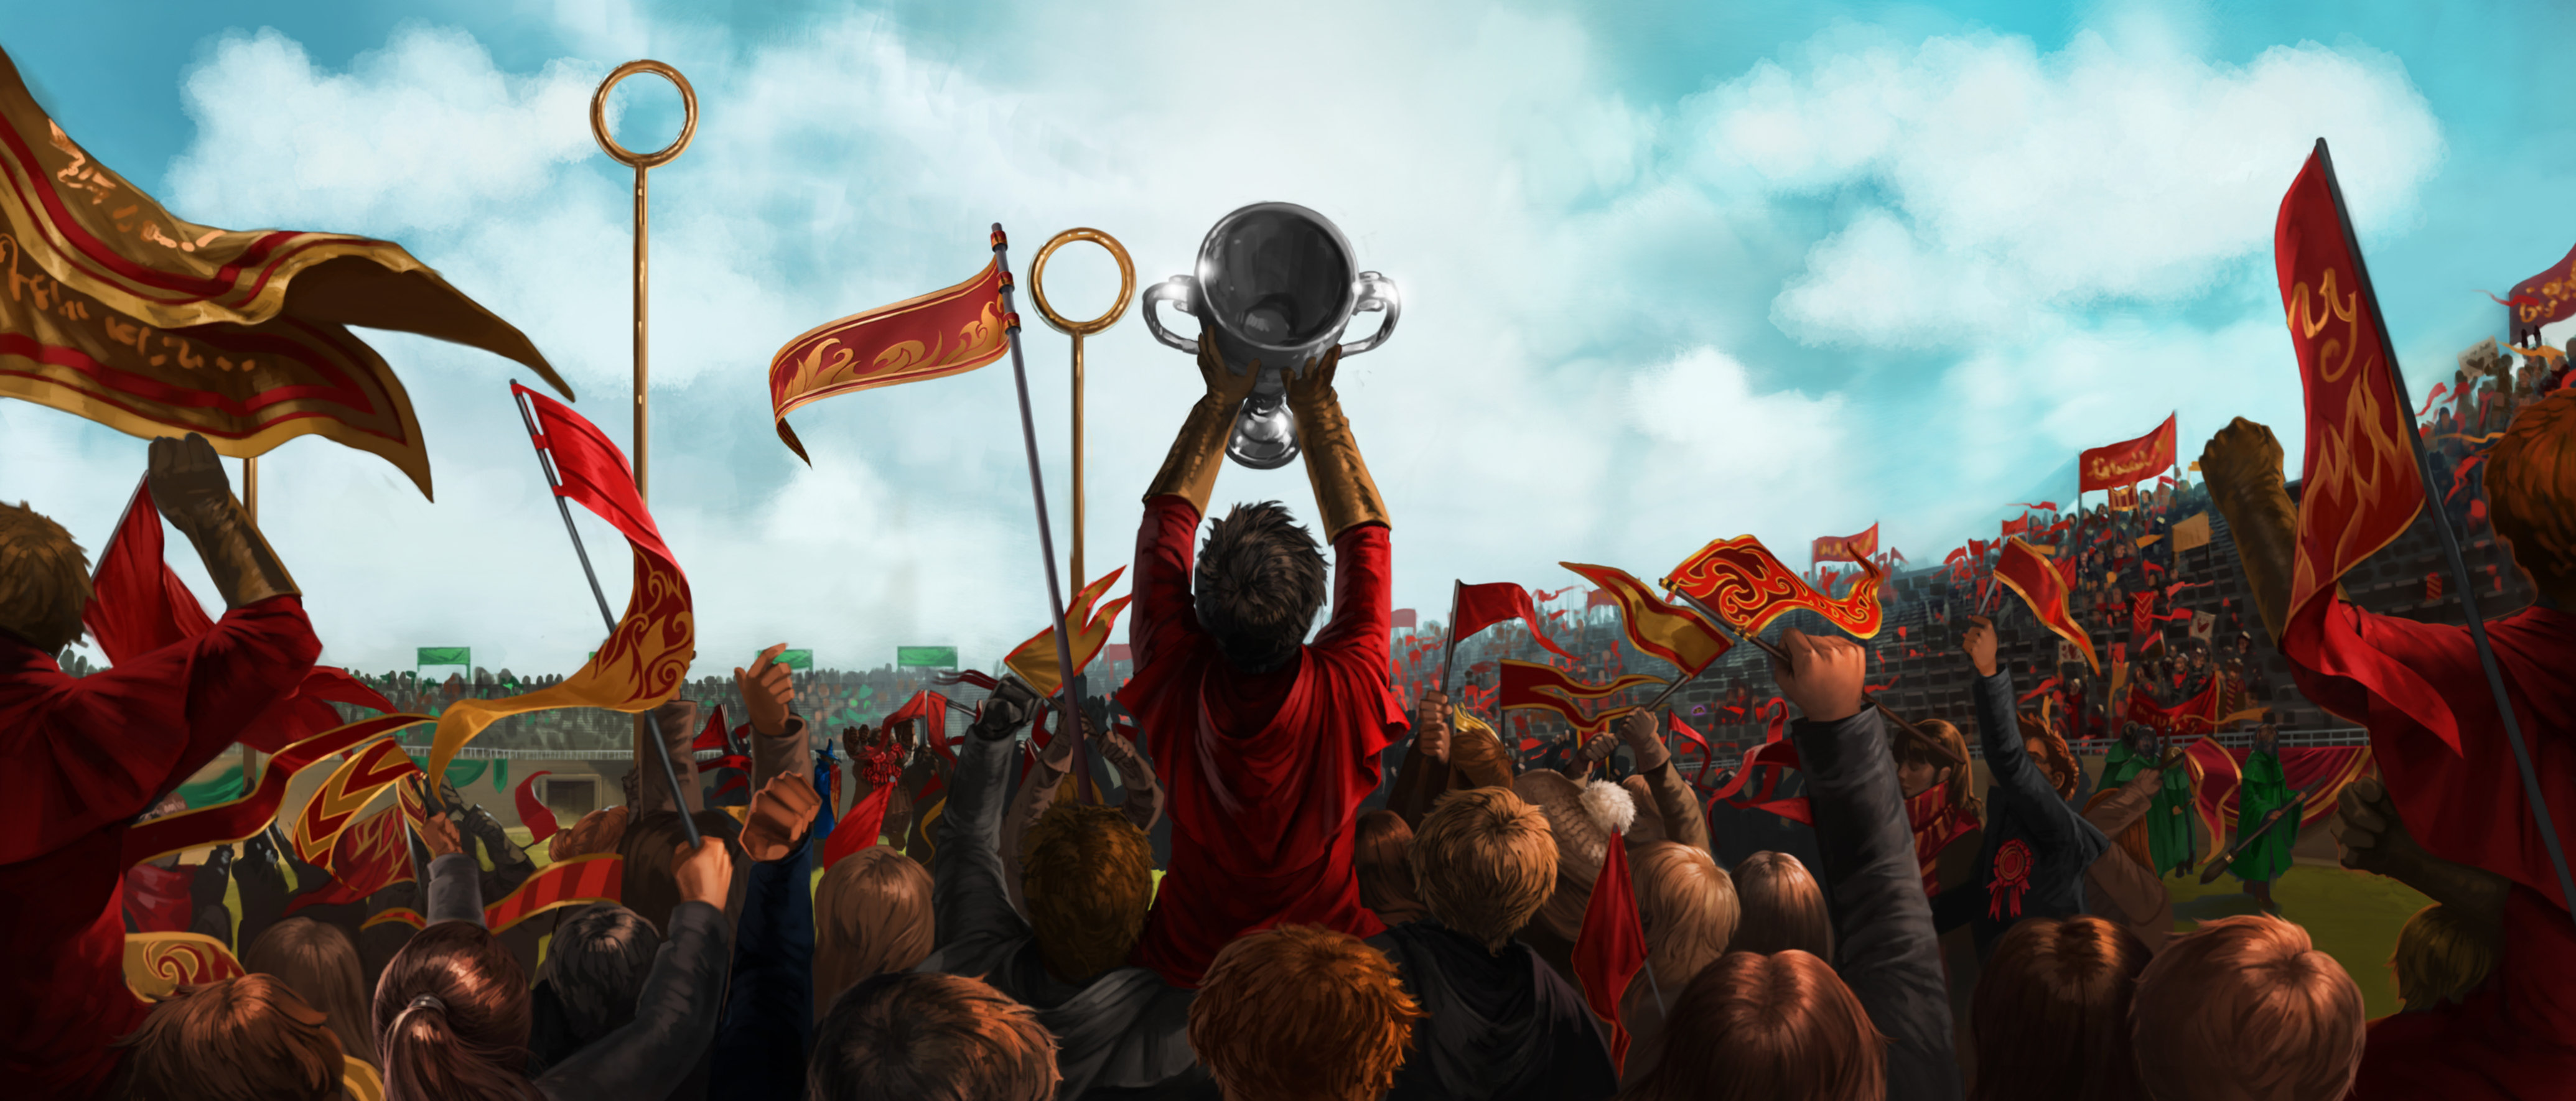 Harry Potter's Quidditch record leaves viewers stunned after